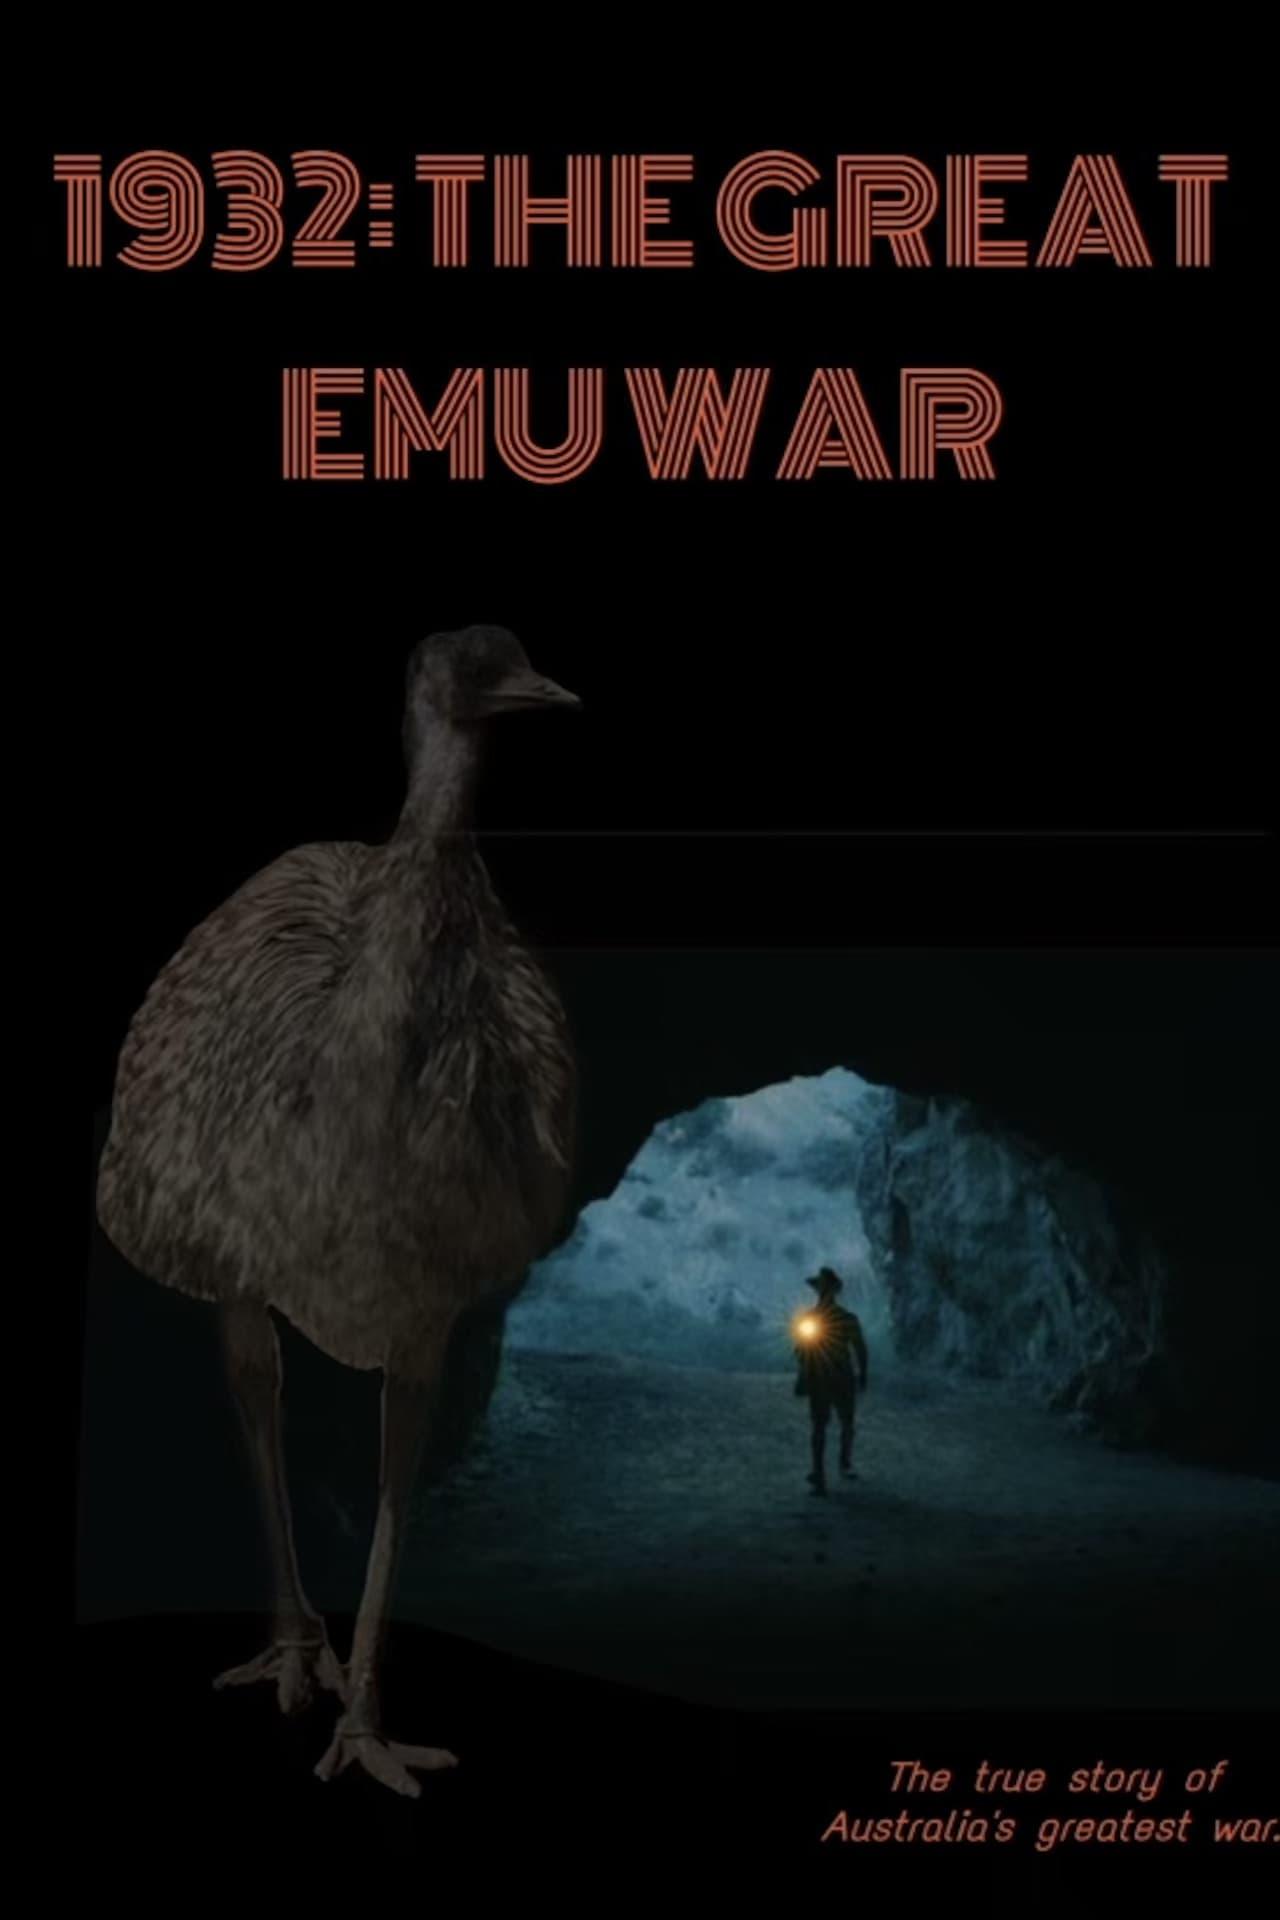 1932: The Great Emu War poster